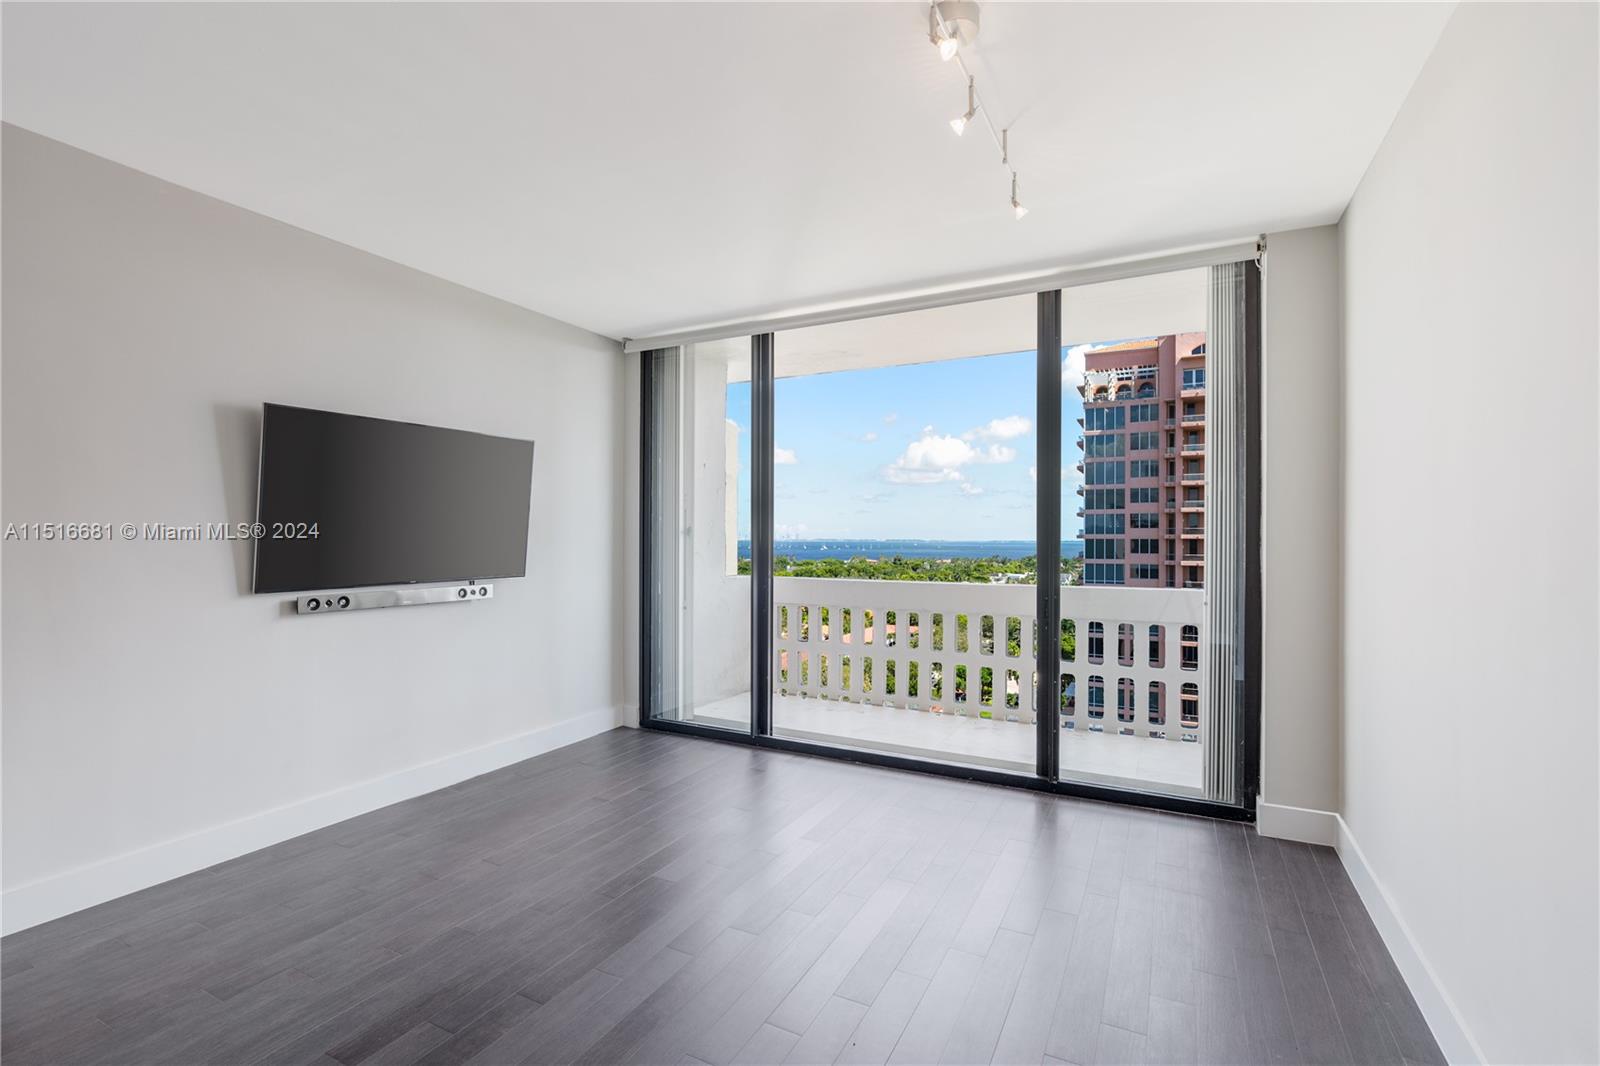 Beautifully renovated Penthouse with massive balcony and endless water views. The perfect location among Miami's most prestigious neighborhoods. Amenities include heated pool overlooking the canal, boat slips that come up for sale and lease, doorman with 24/7 concierge, valet & security, large clubhouse room, game room & Gym. 40 & 50 year recertification have been completed as well, building has been renovated.